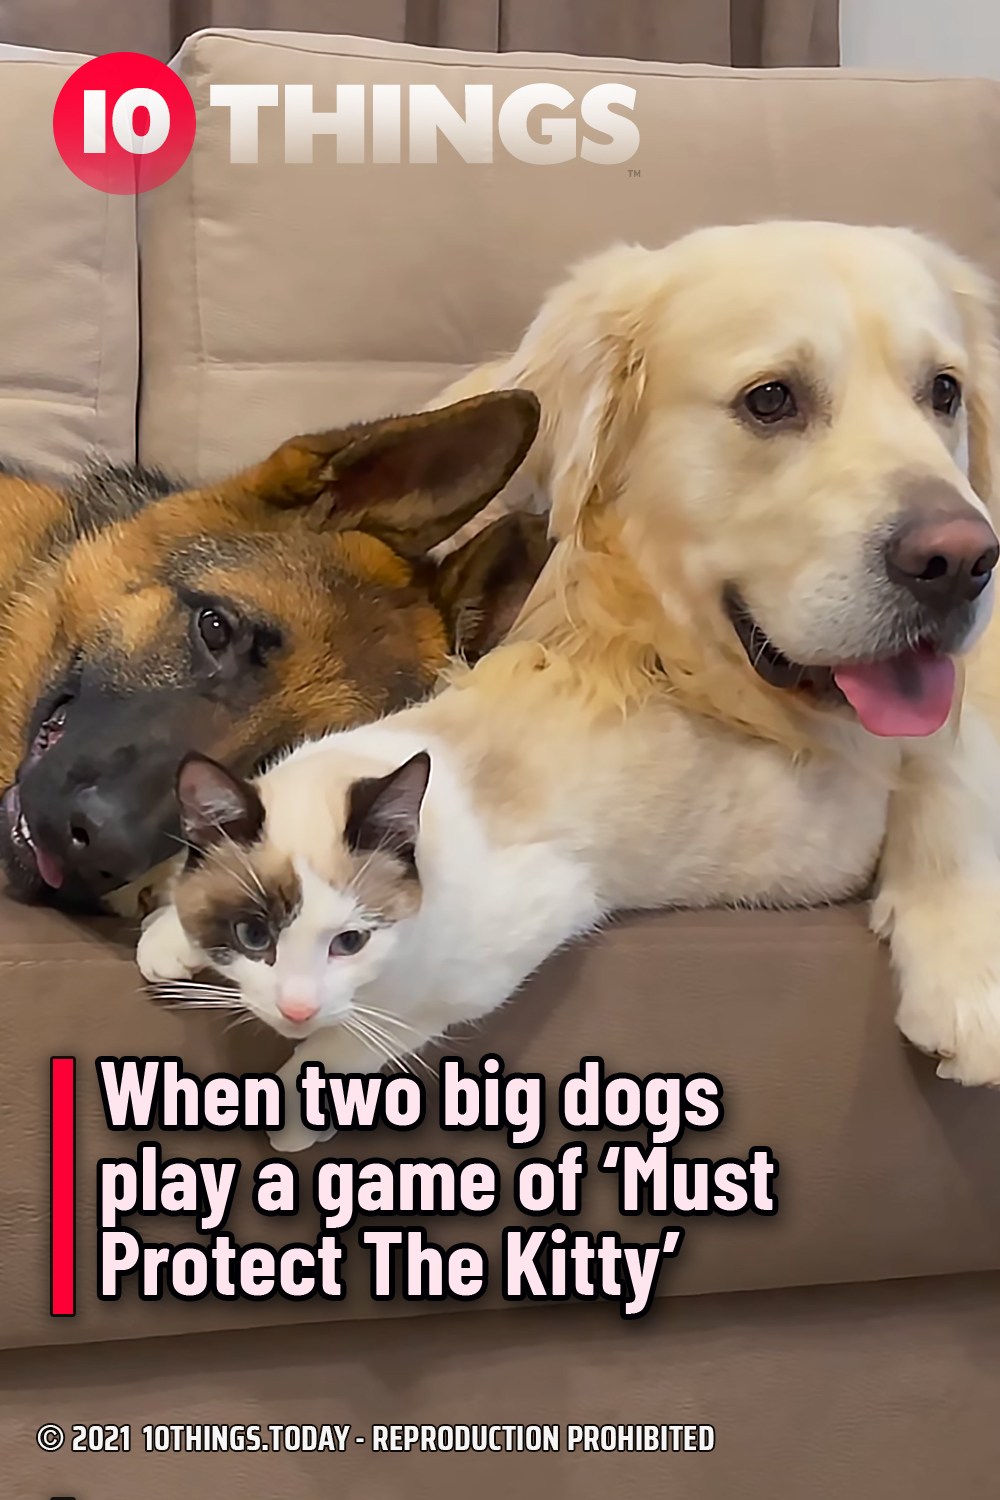 When two big dogs play a game of ‘Must Protect The Kitty’